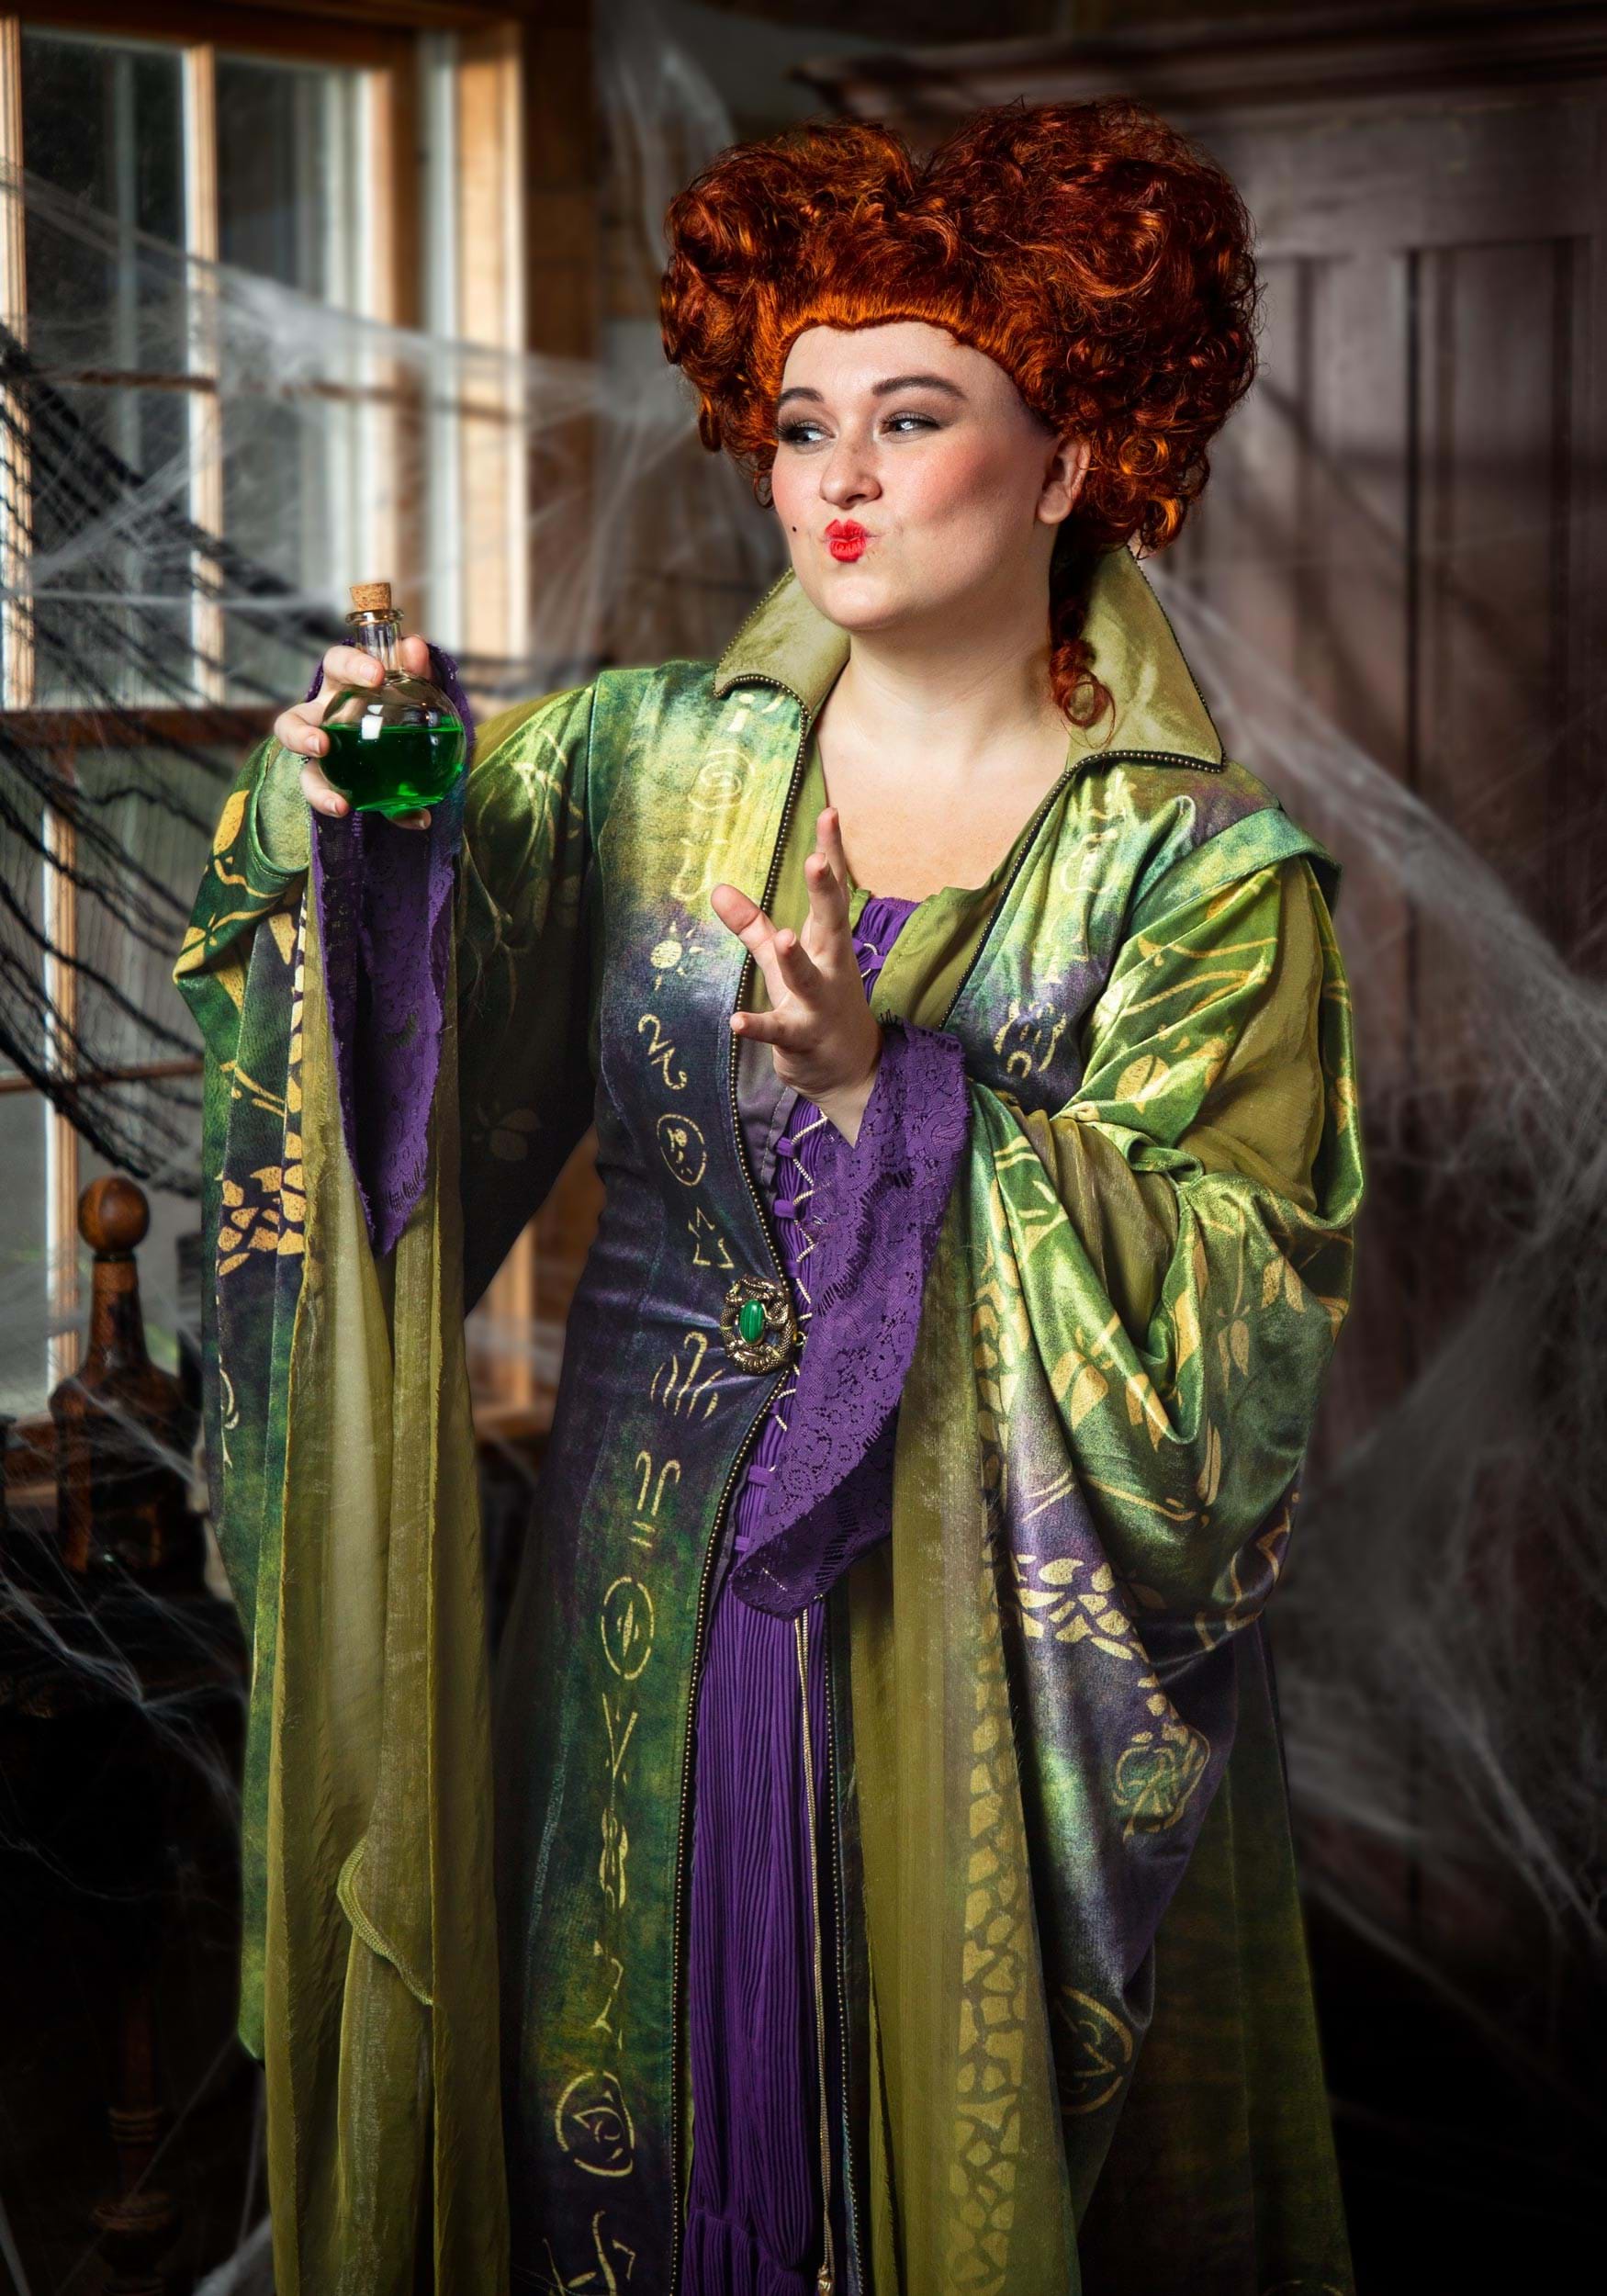 Details about   Winifred Sanderson Hocus Pocus Woman Costume Adult Teen 7-9 